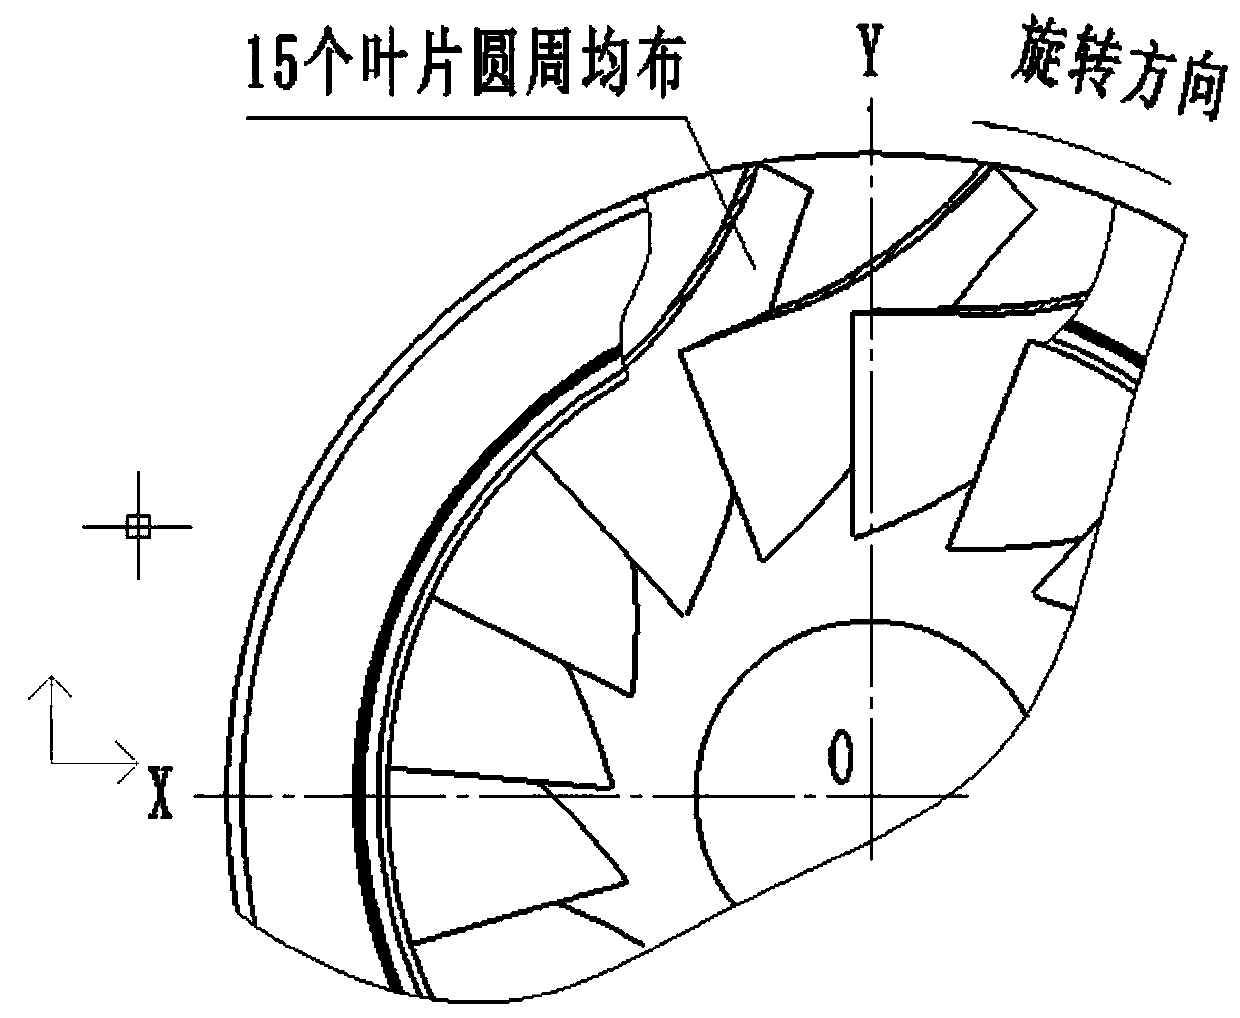 Method for finish machining of three-dimensional impeller made of FV520B material through integral hard alloy cutters